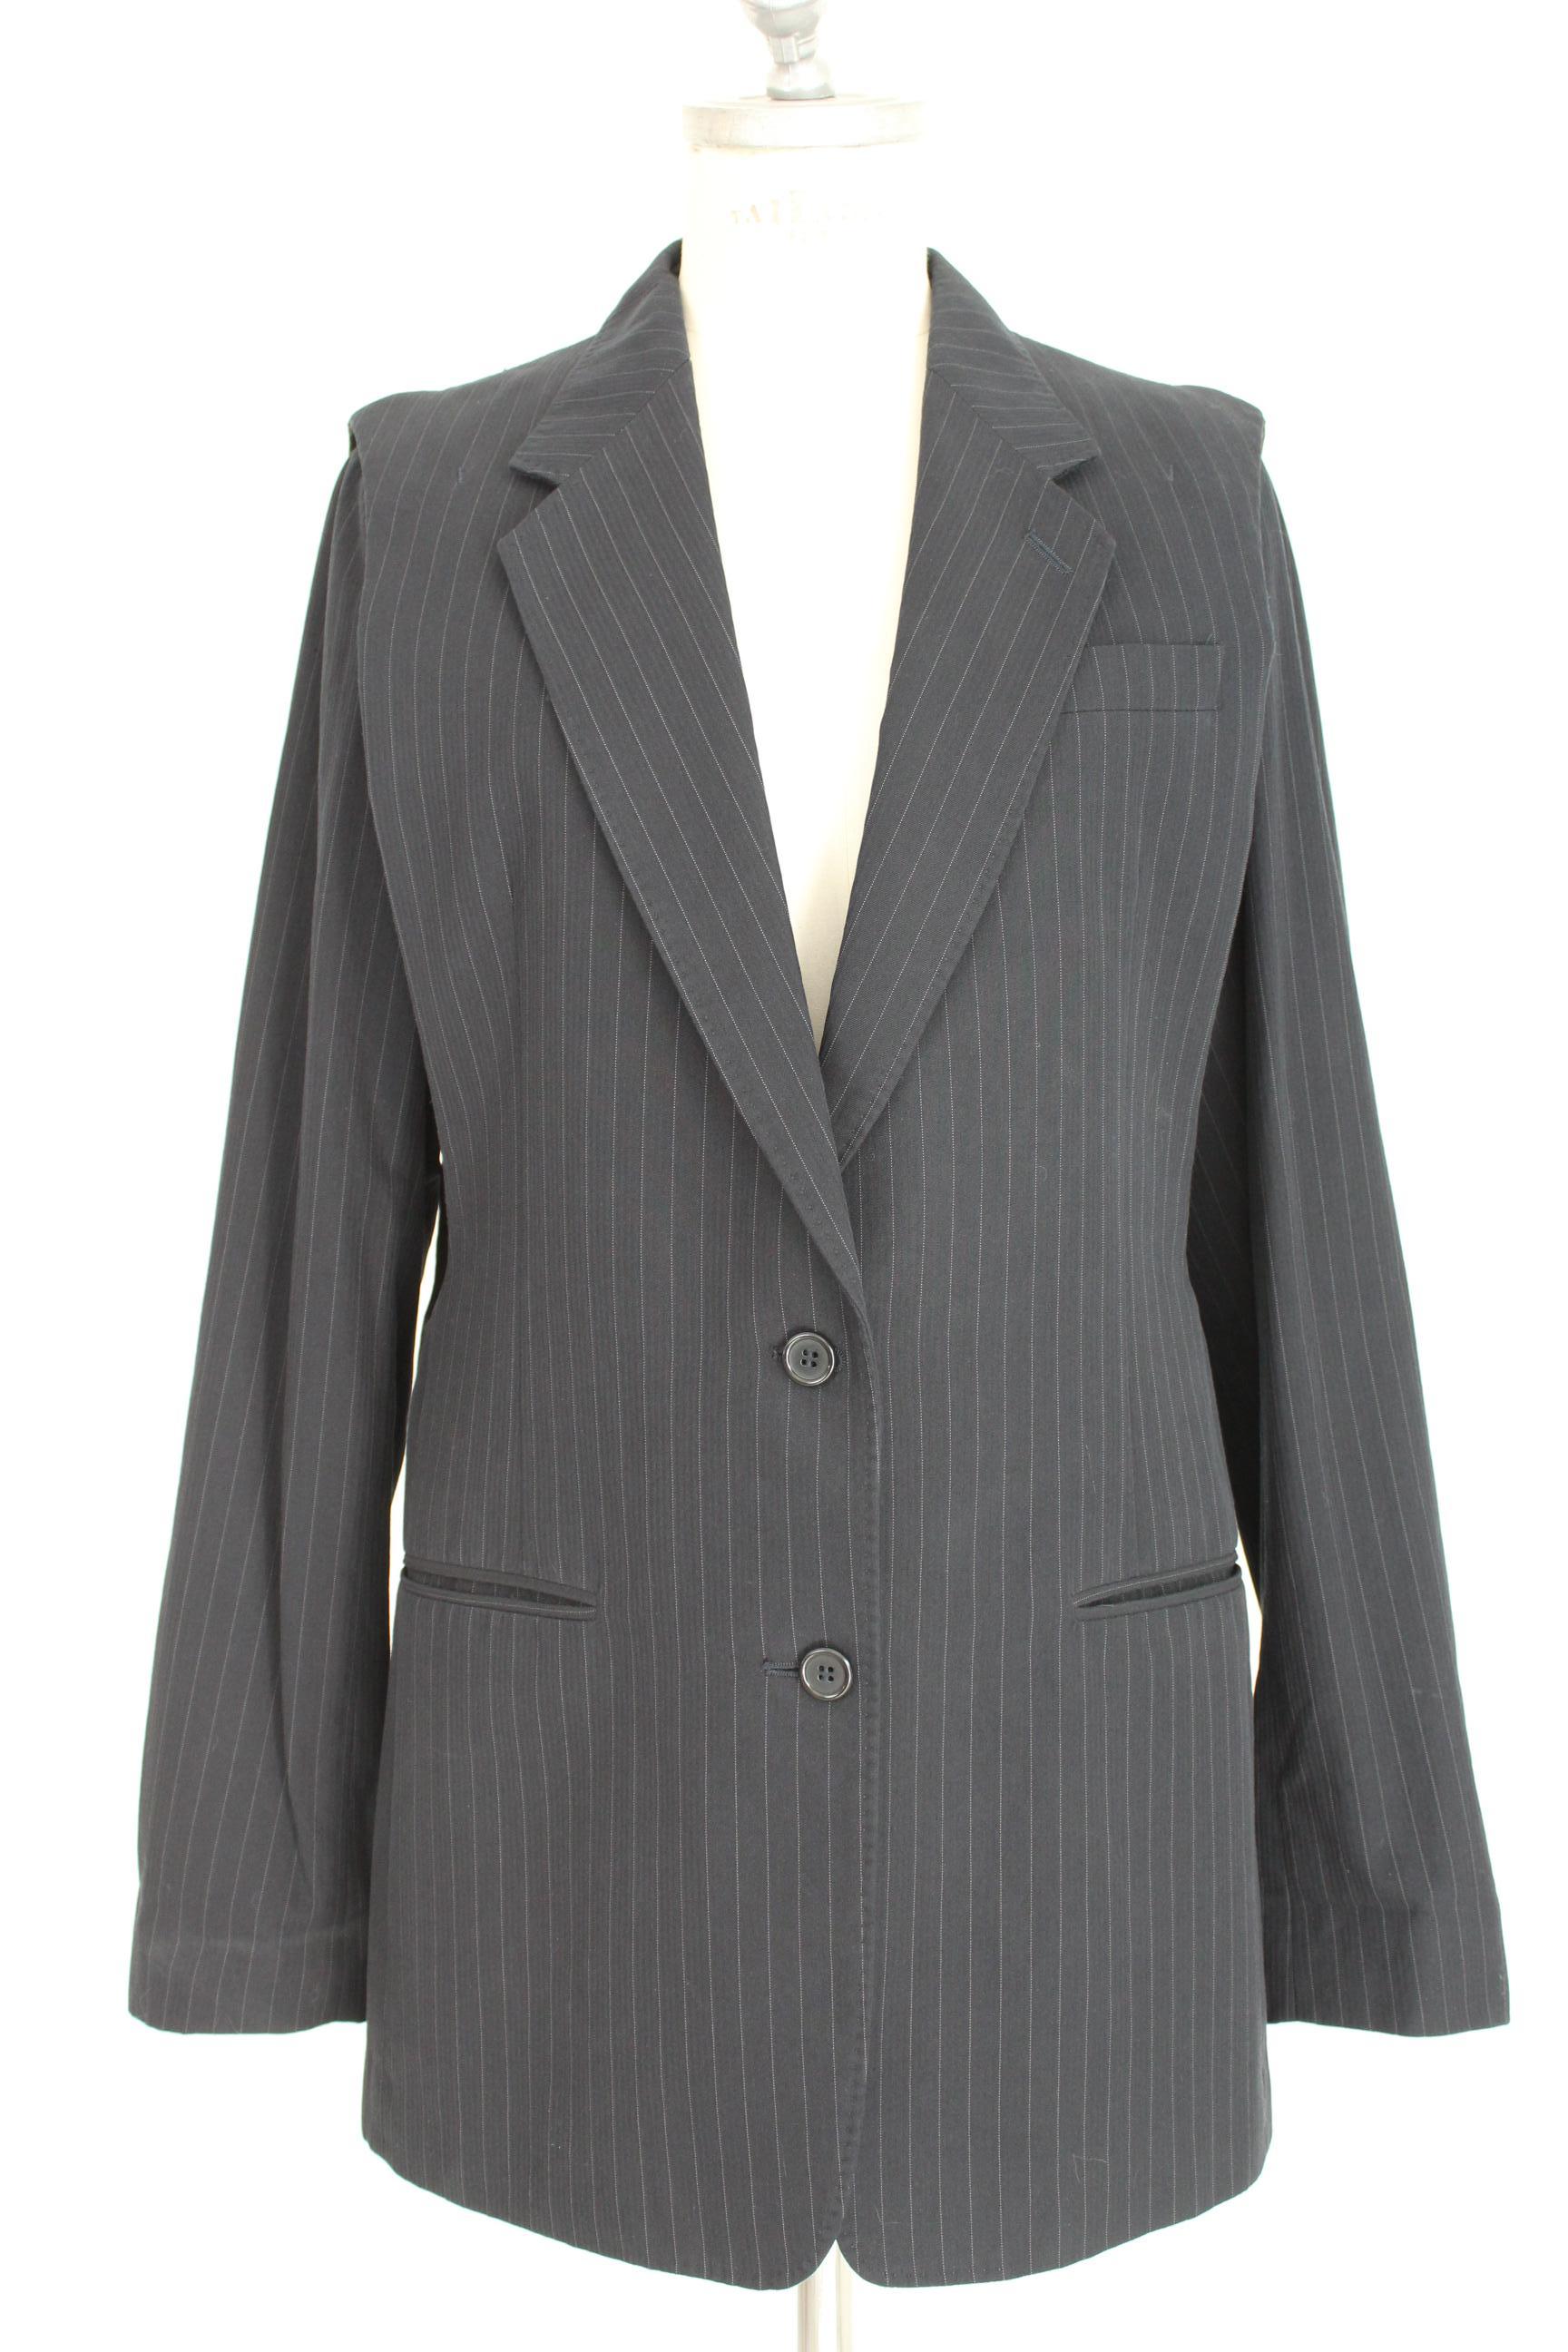 Maison Martin Margiela vintage 90s women's jacket. Sleeveless long blazer, pinstripe blue and gray, 100% cotton. The jacket can become a vest by removing the sleeves with a clip. Made in Italy. Excellent vintage conditions.



Size: 44 It 10 Us 12